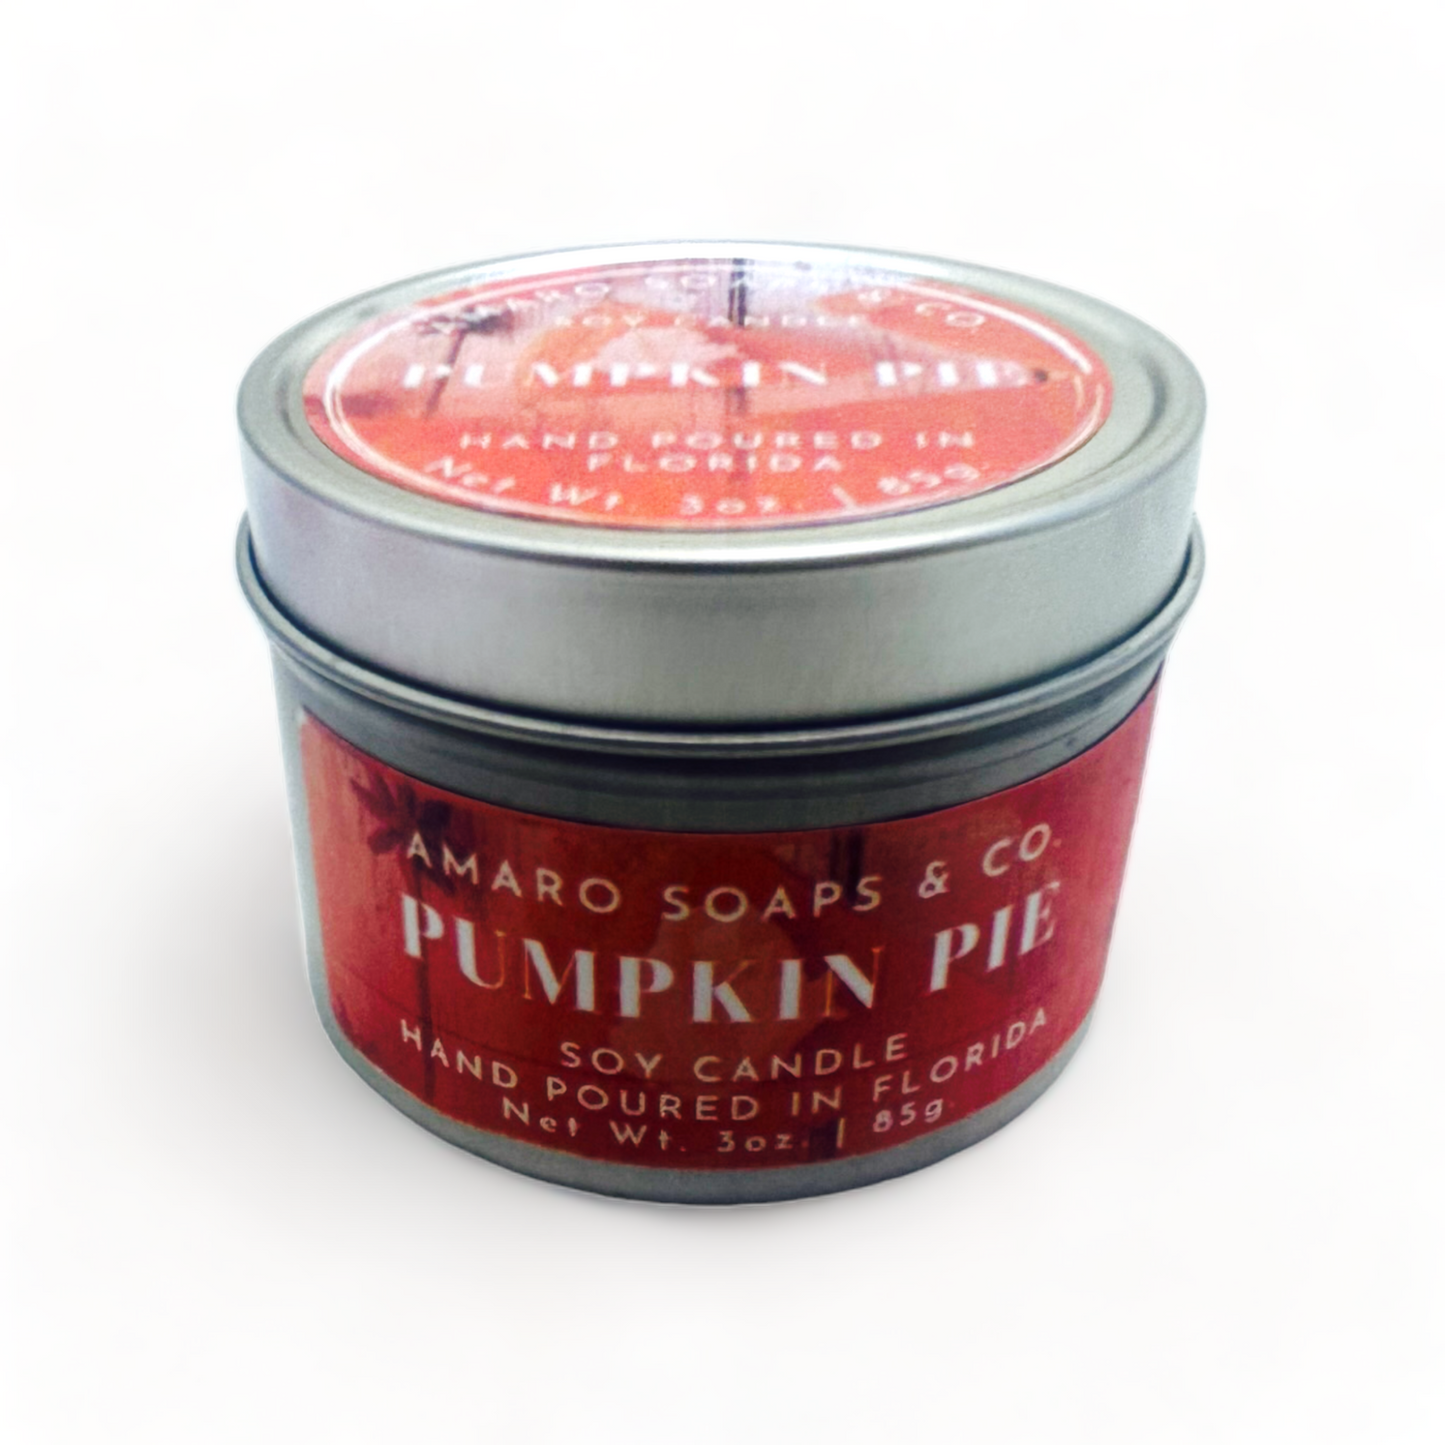 Pumpkin Pie Soy Candle Tin